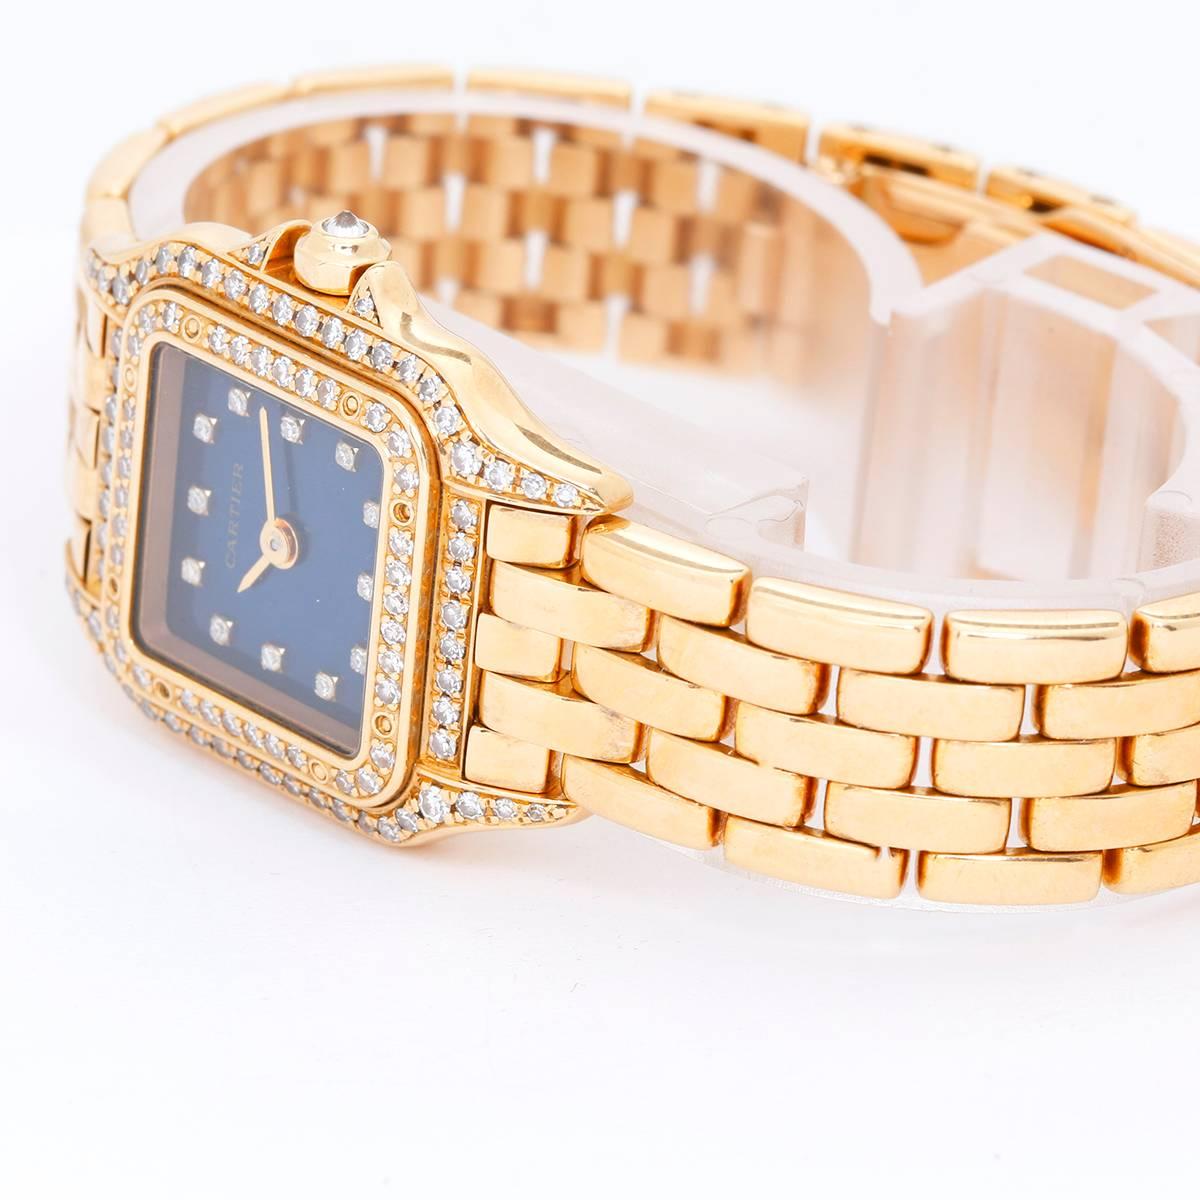 Cartier Small 18K Yellow Gold Panther  Ladies Watch -  Quartz. 18K Yellow Gold  (30 x 22 mm); Diamond bezel. Blue enamel  with hour diamond markers. 18K Yellow Gold Panther bracelet with deployant buckle. Pre-owned with box.